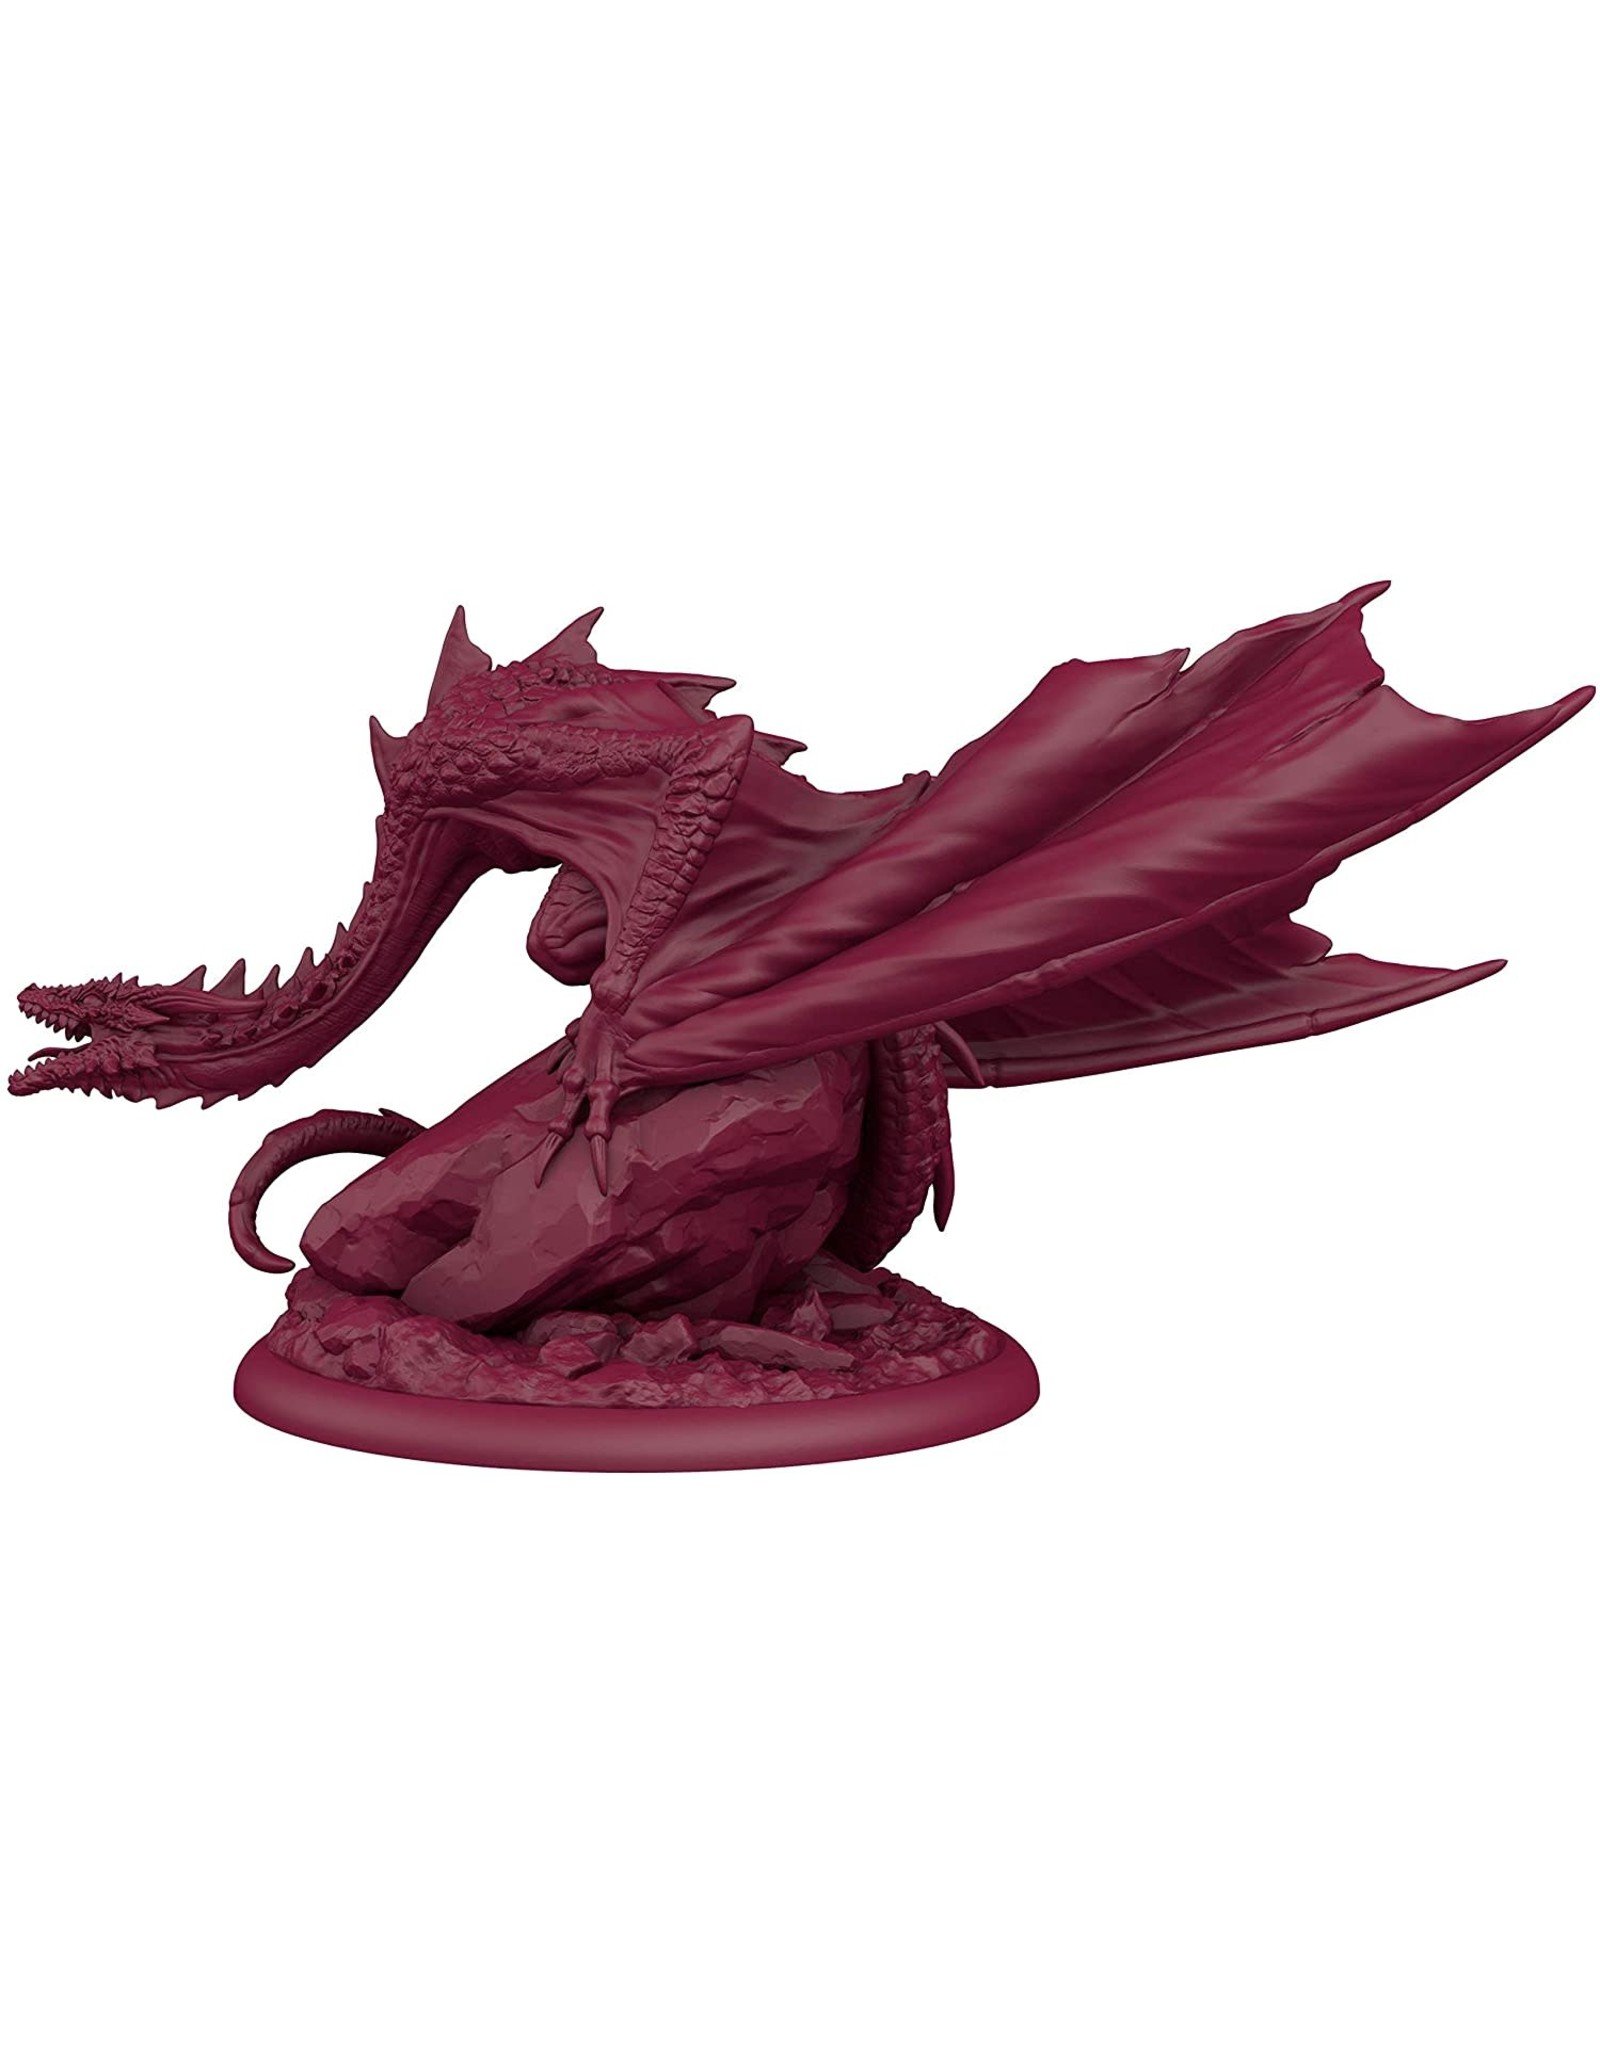 Cool Mini or Not Targaryen Mother of Dragons - A Song of Ice & Fire